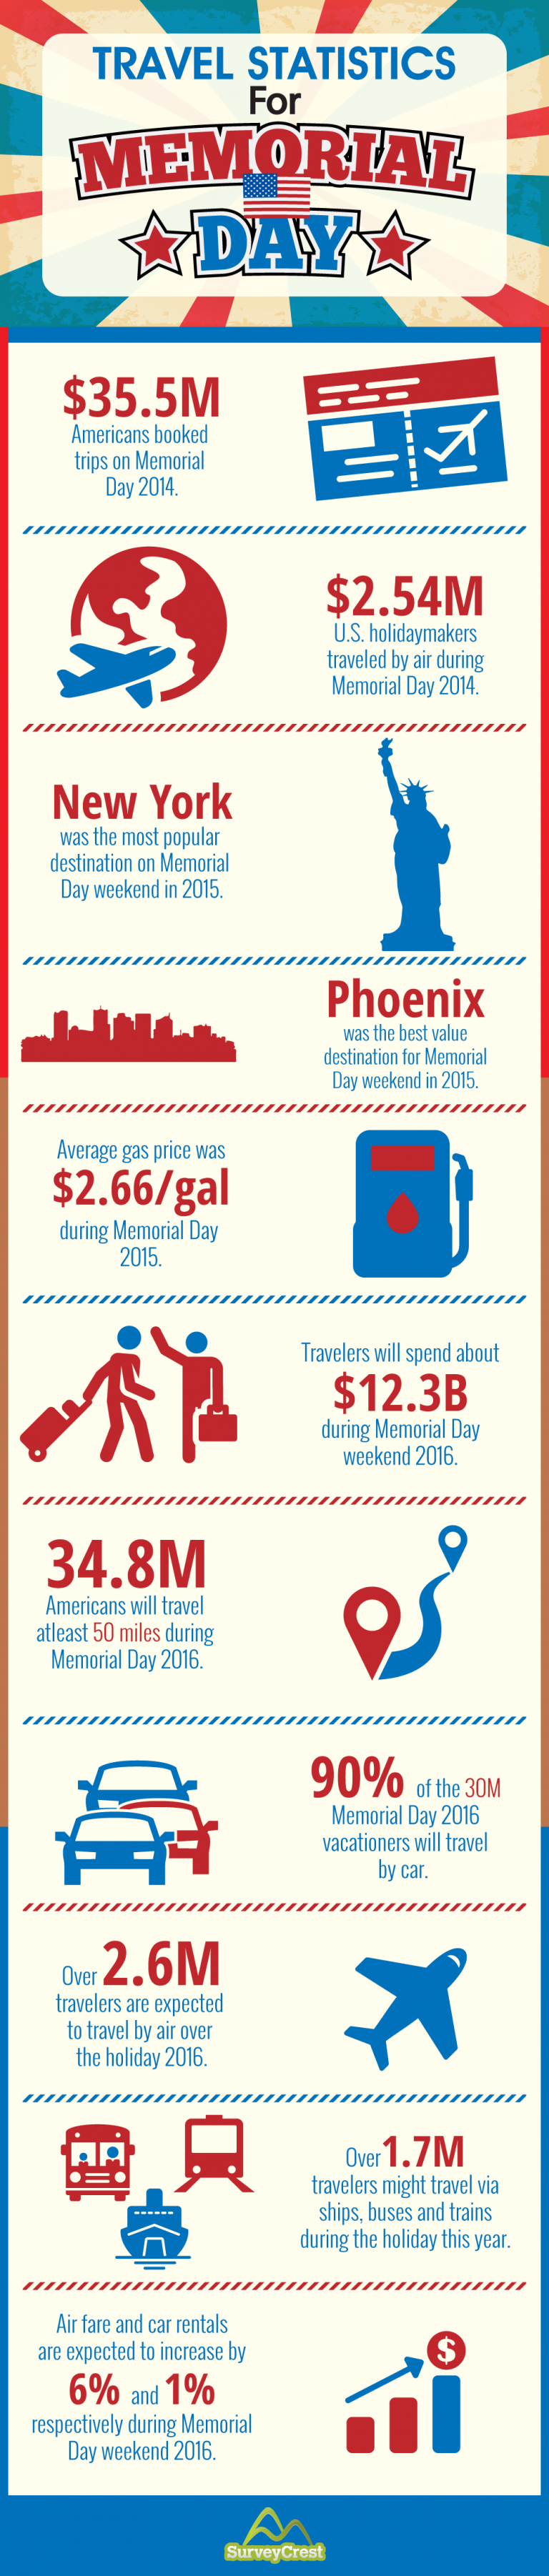 [INFOGRAPHIC] Travel Statistics For Memorial Day